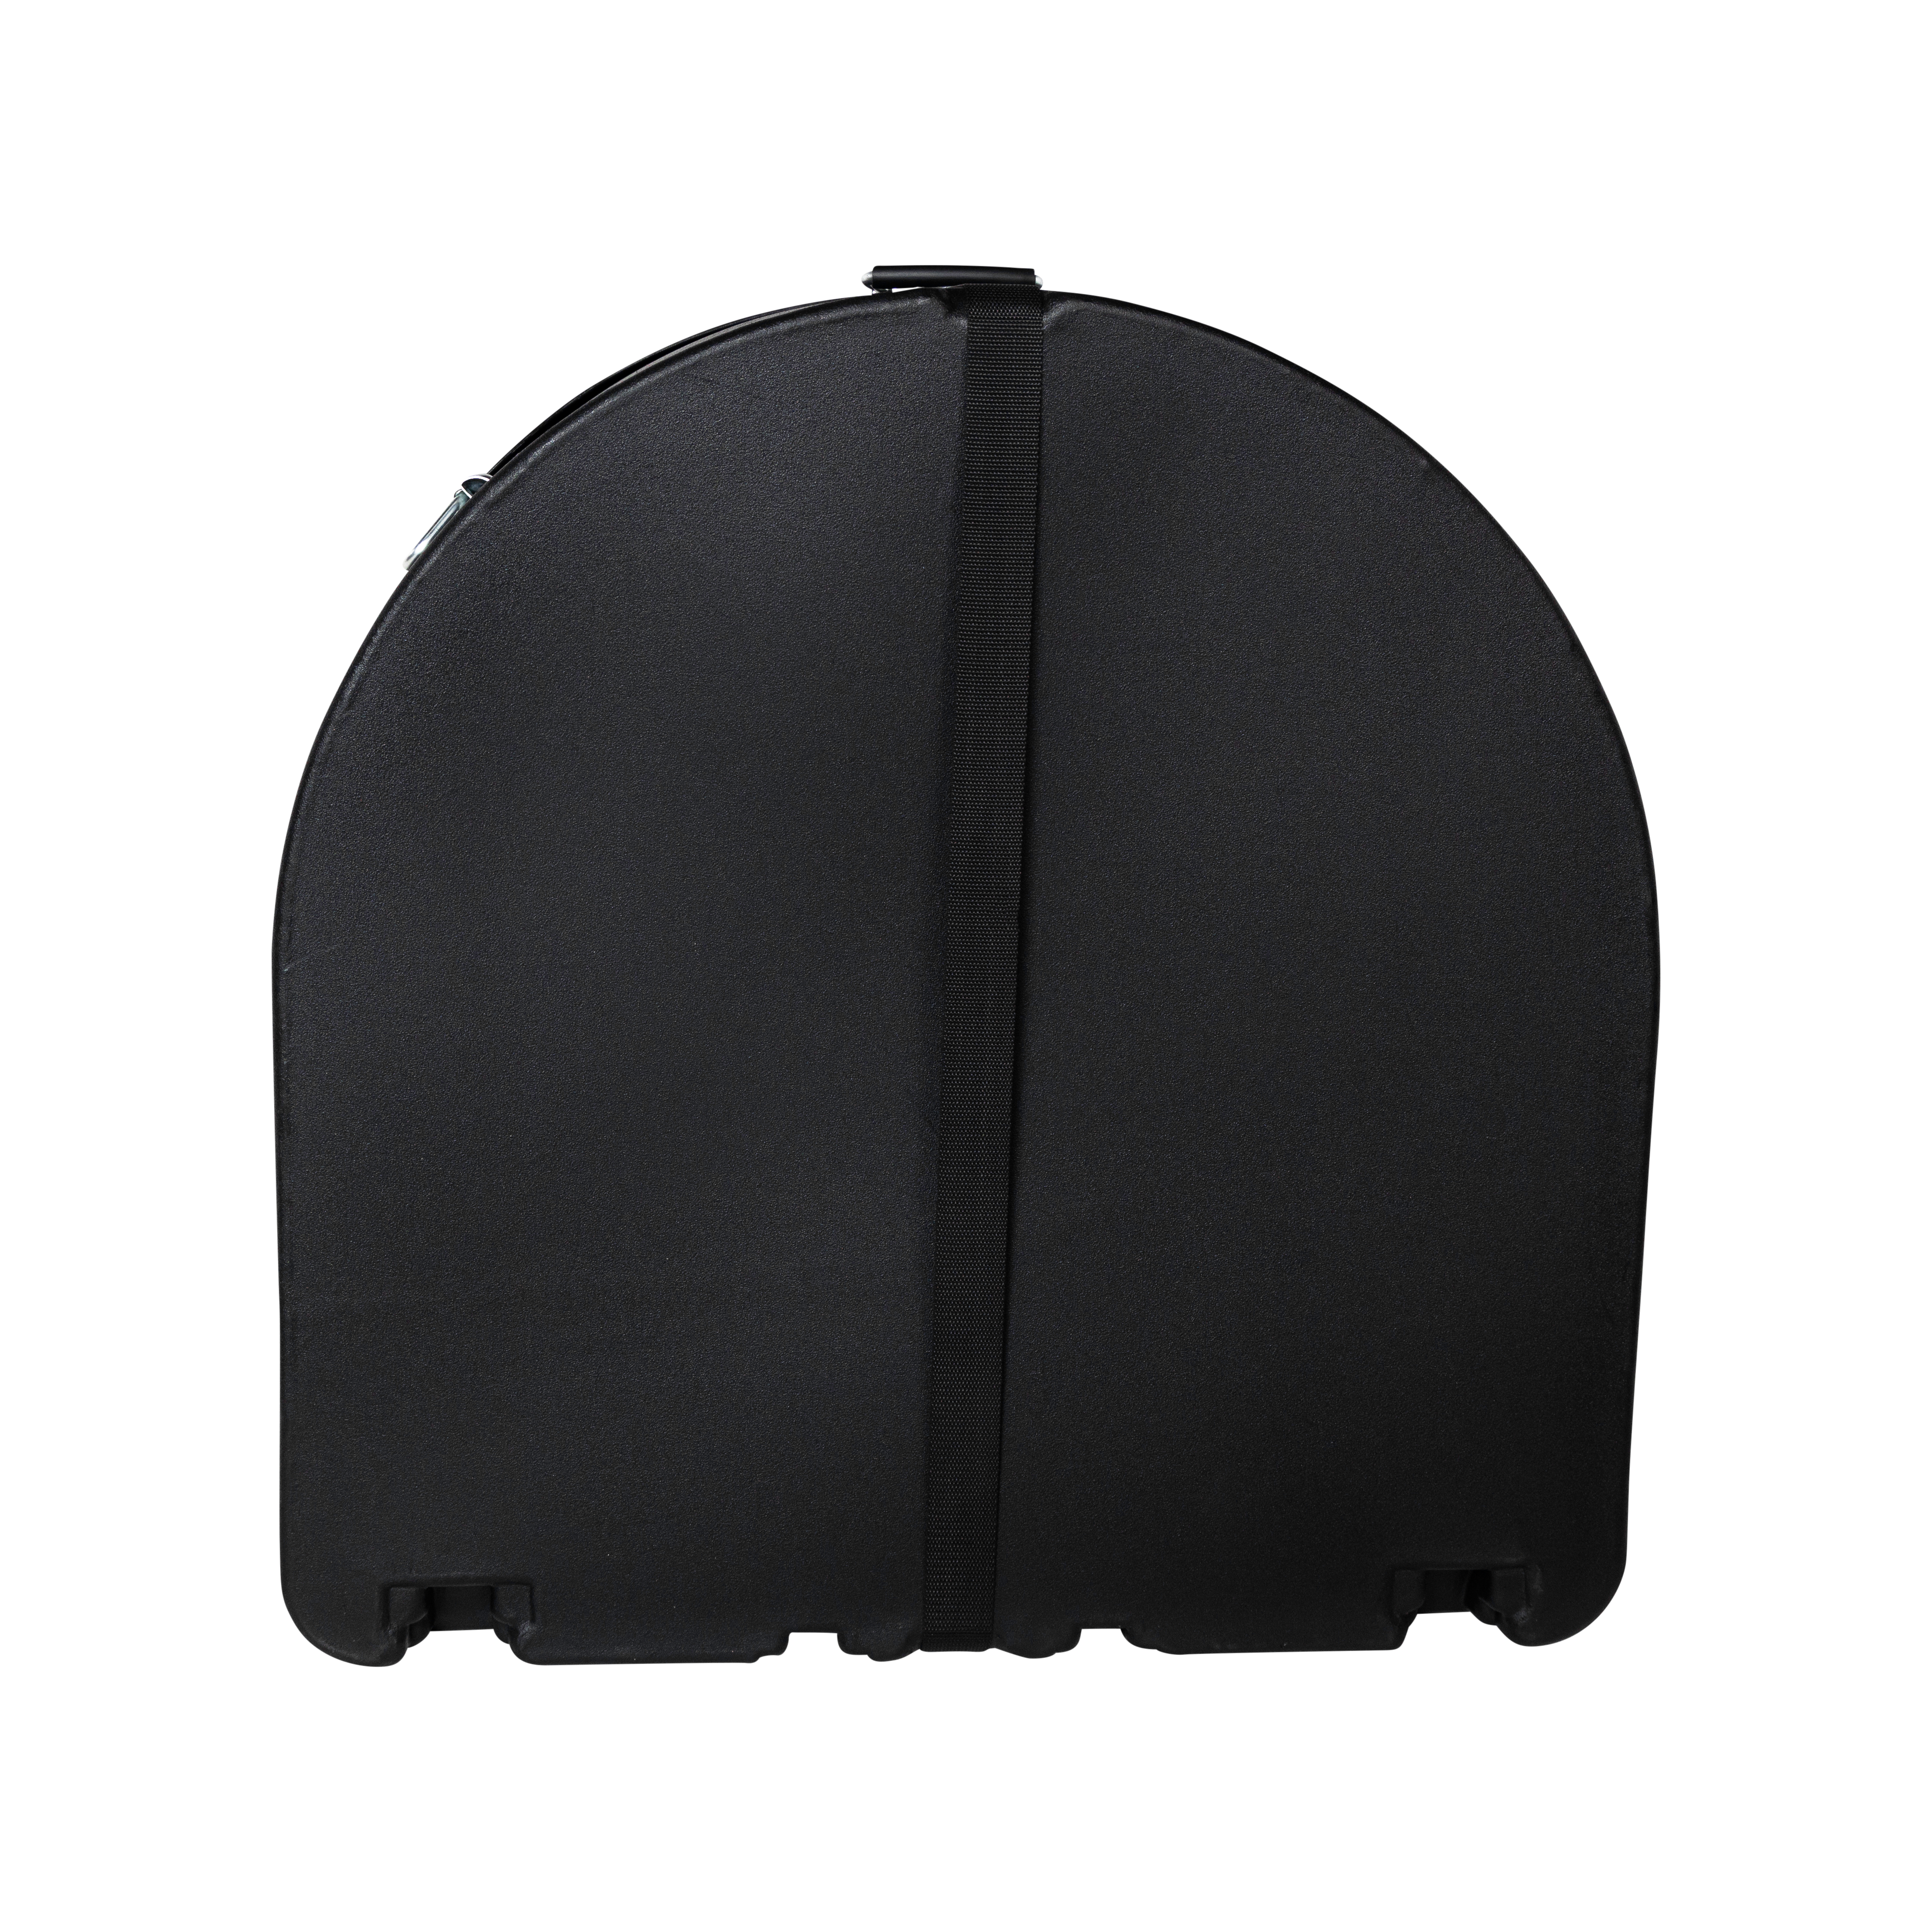 26″ x 14″ Classic Series Marching Bass Drum Case-GP-PC2614MBD